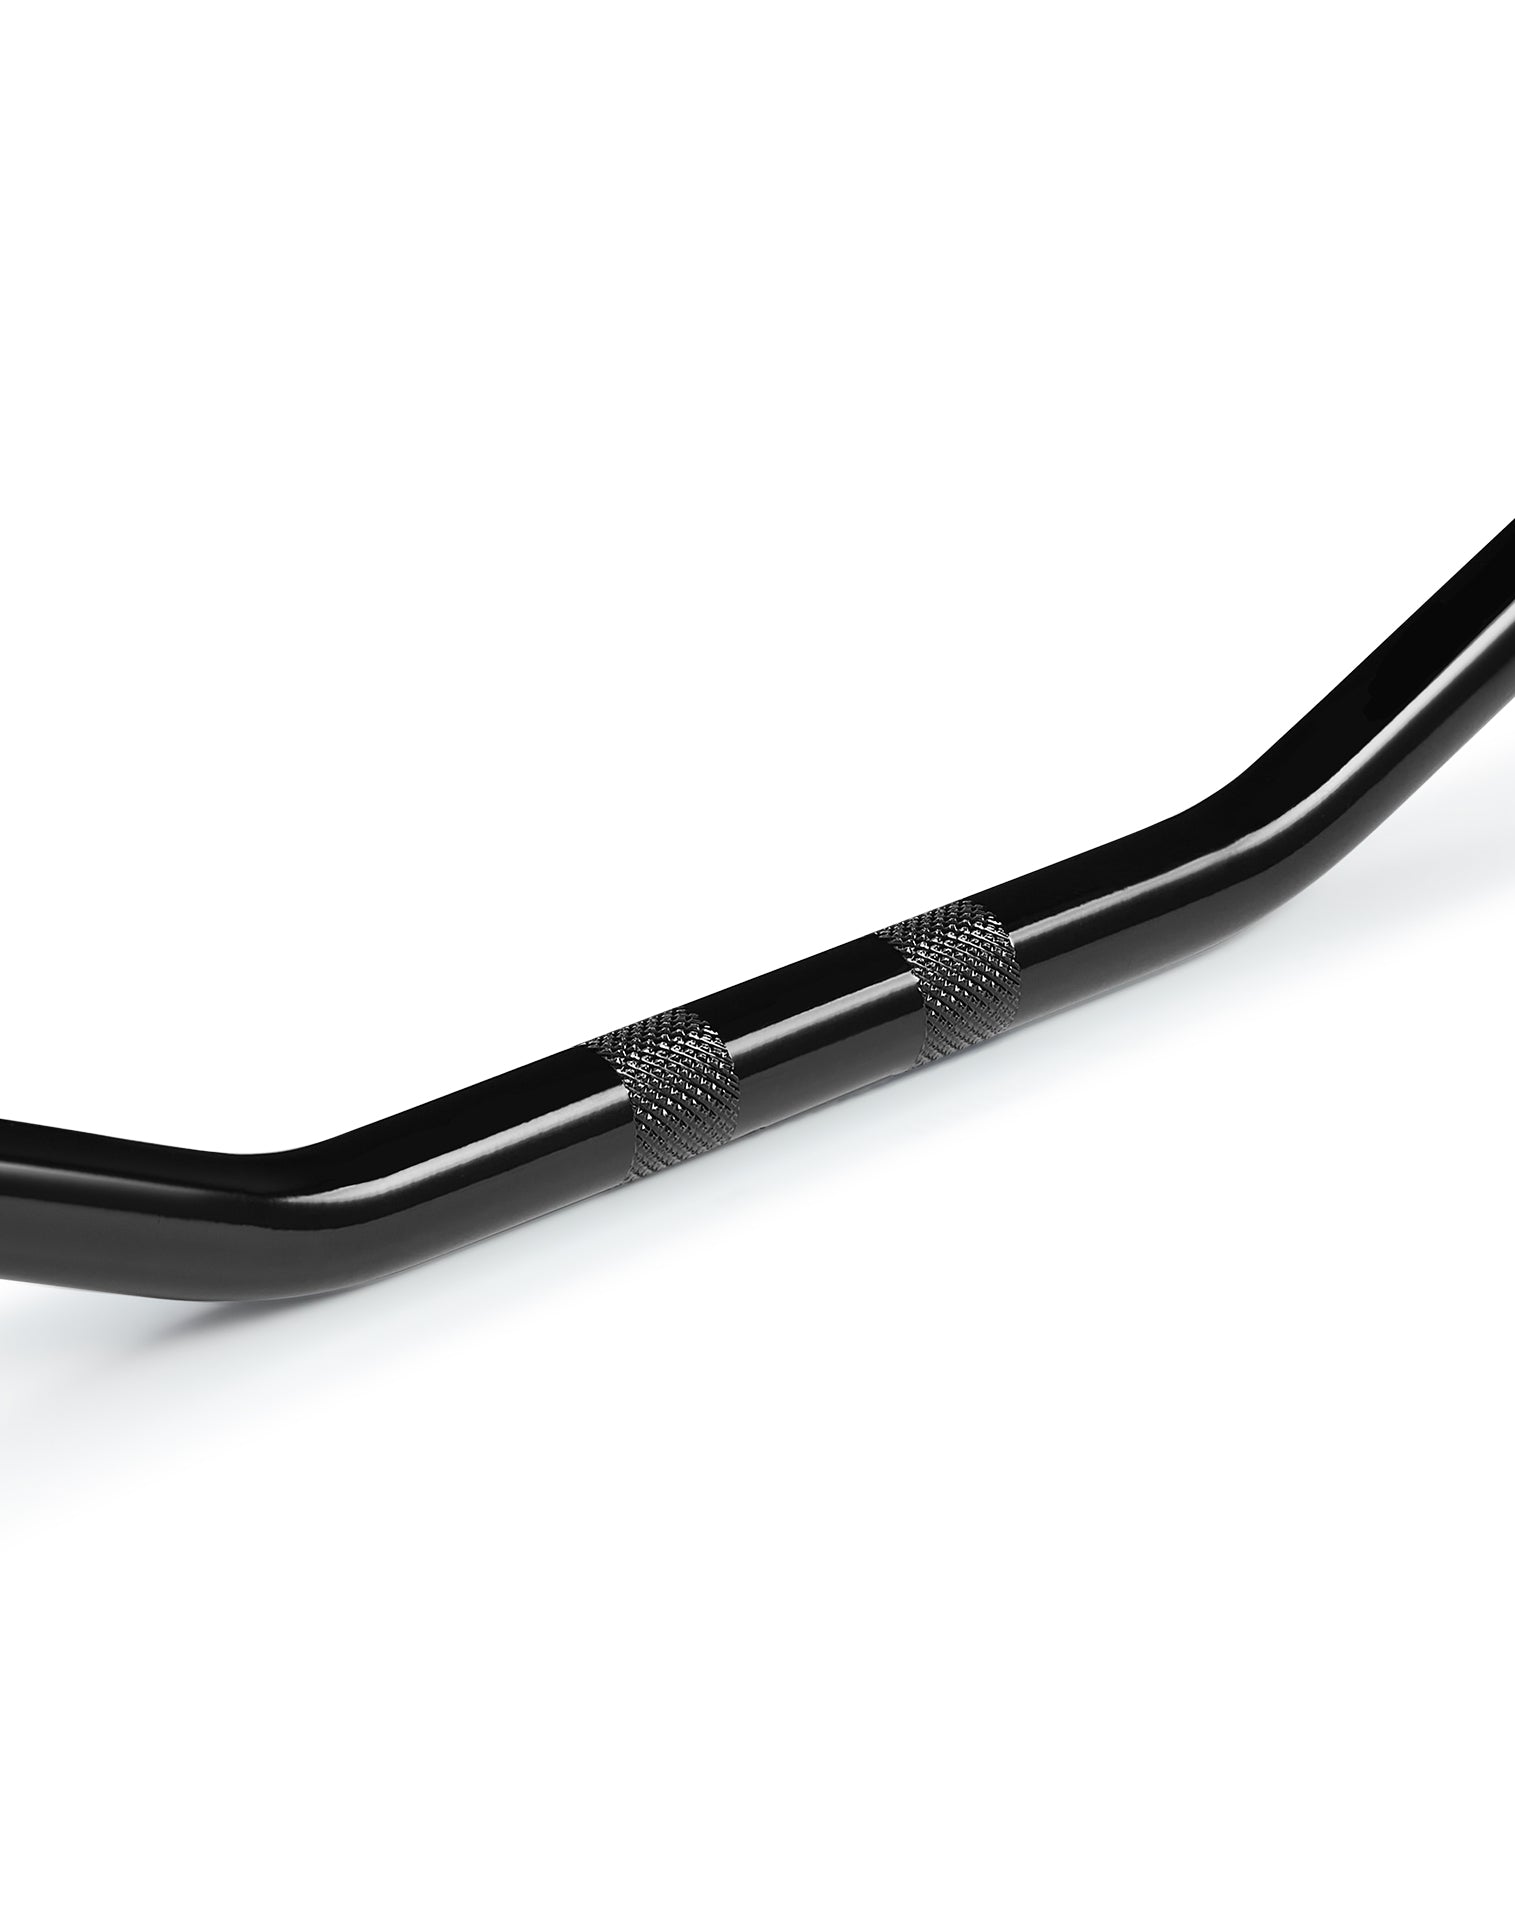 Viking Iron Born Drag Handlebar For Harley Dyna Low Rider FXDL Gloss Black Close Up View